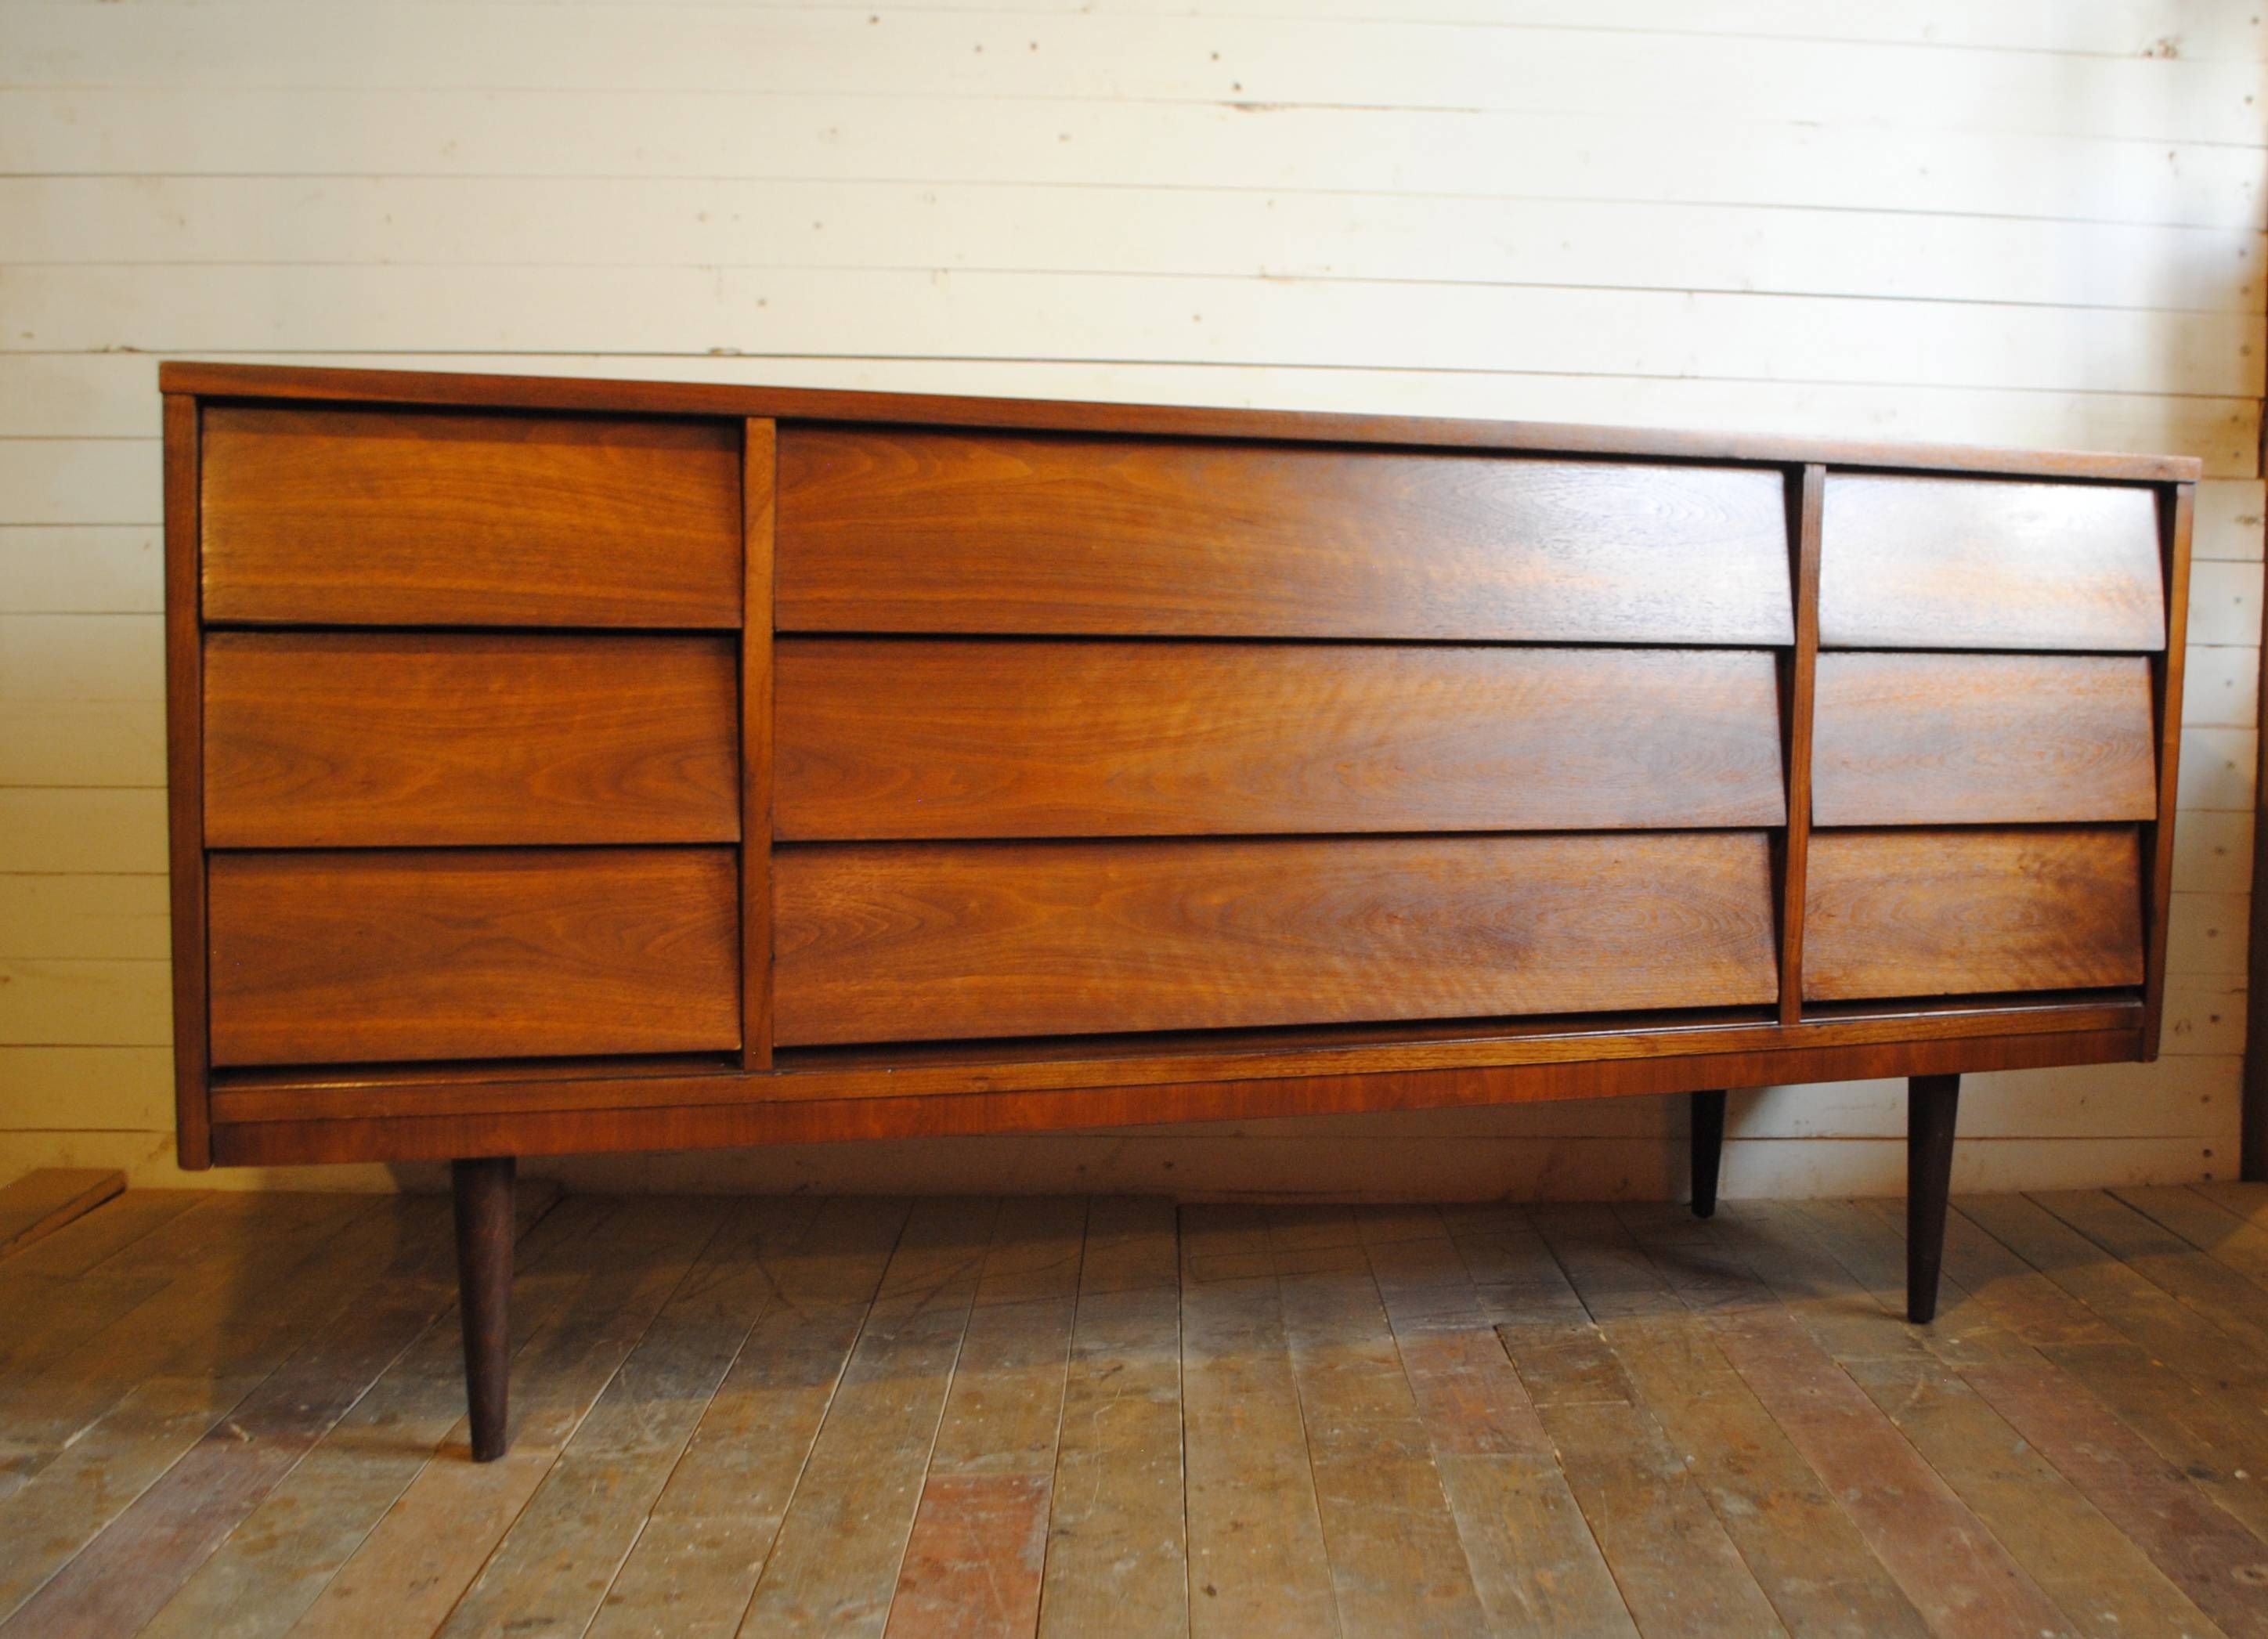 Credenzas And Sideboards Best Of At Modern Credenzas Sideboards In Credenzas And Sideboards (View 10 of 15)